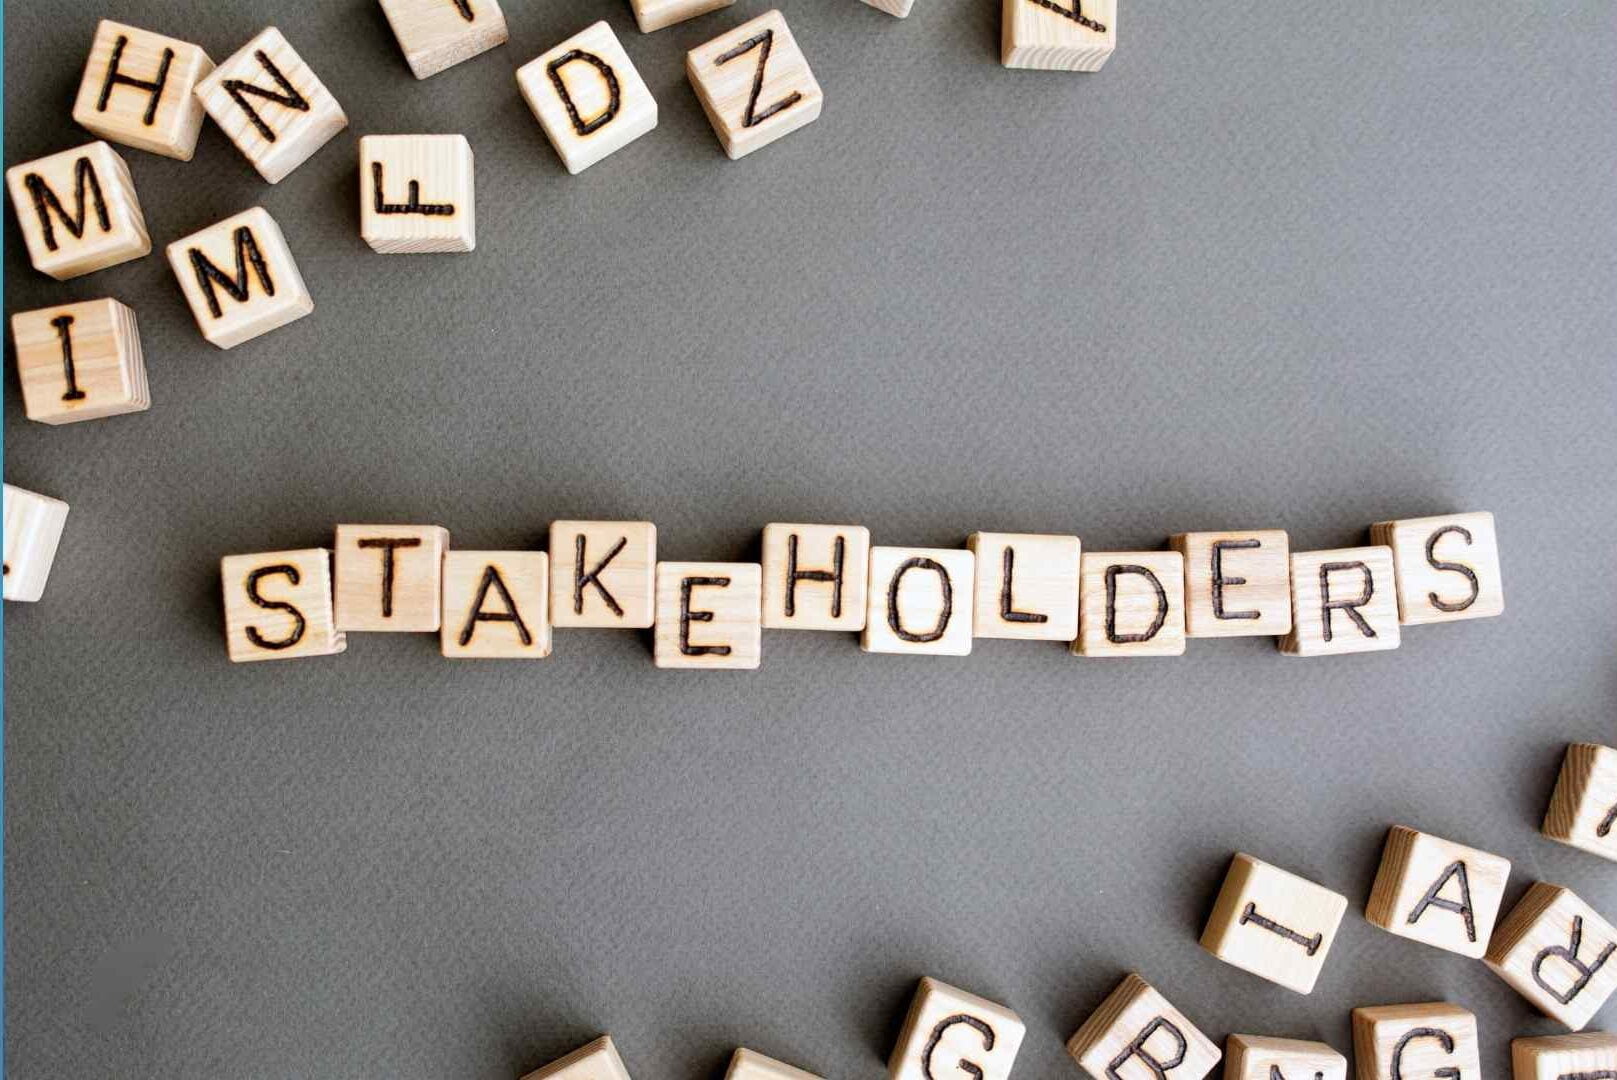 How to use it to collaborate & communicate with stakeholders